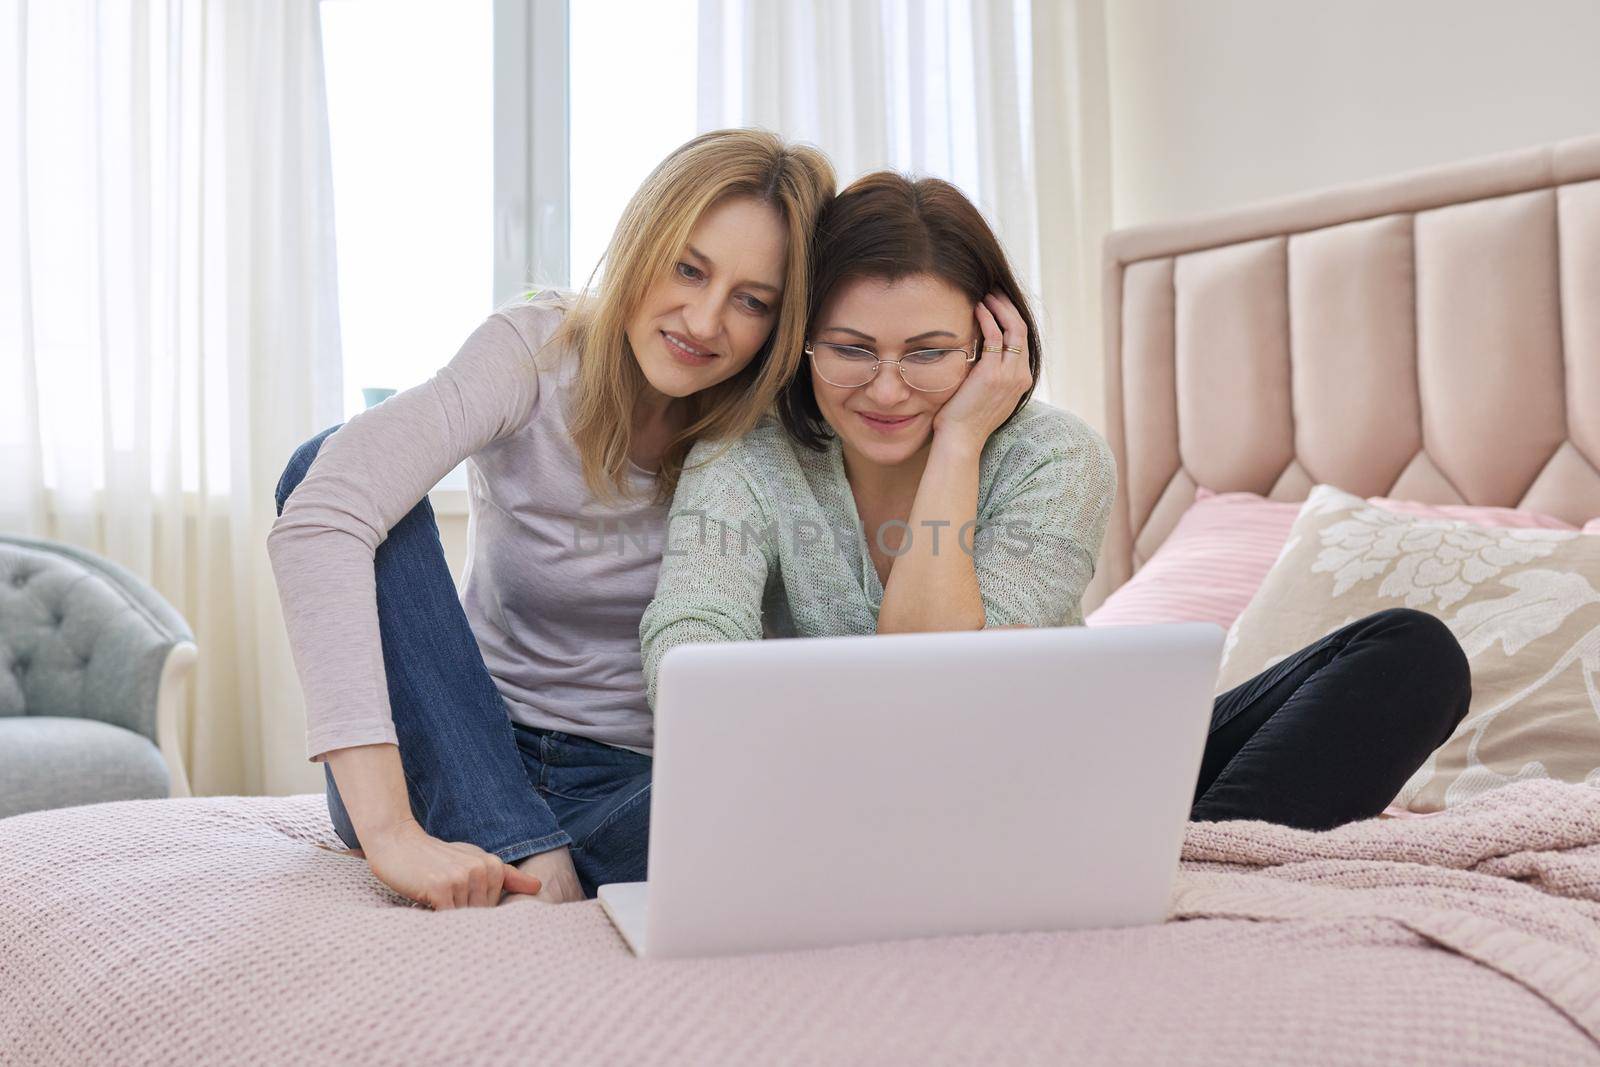 Two happy middle aged women having rest sitting together at home on bed, looking in laptop screen. Same sex female couple, relationship, lifestyle, people concept